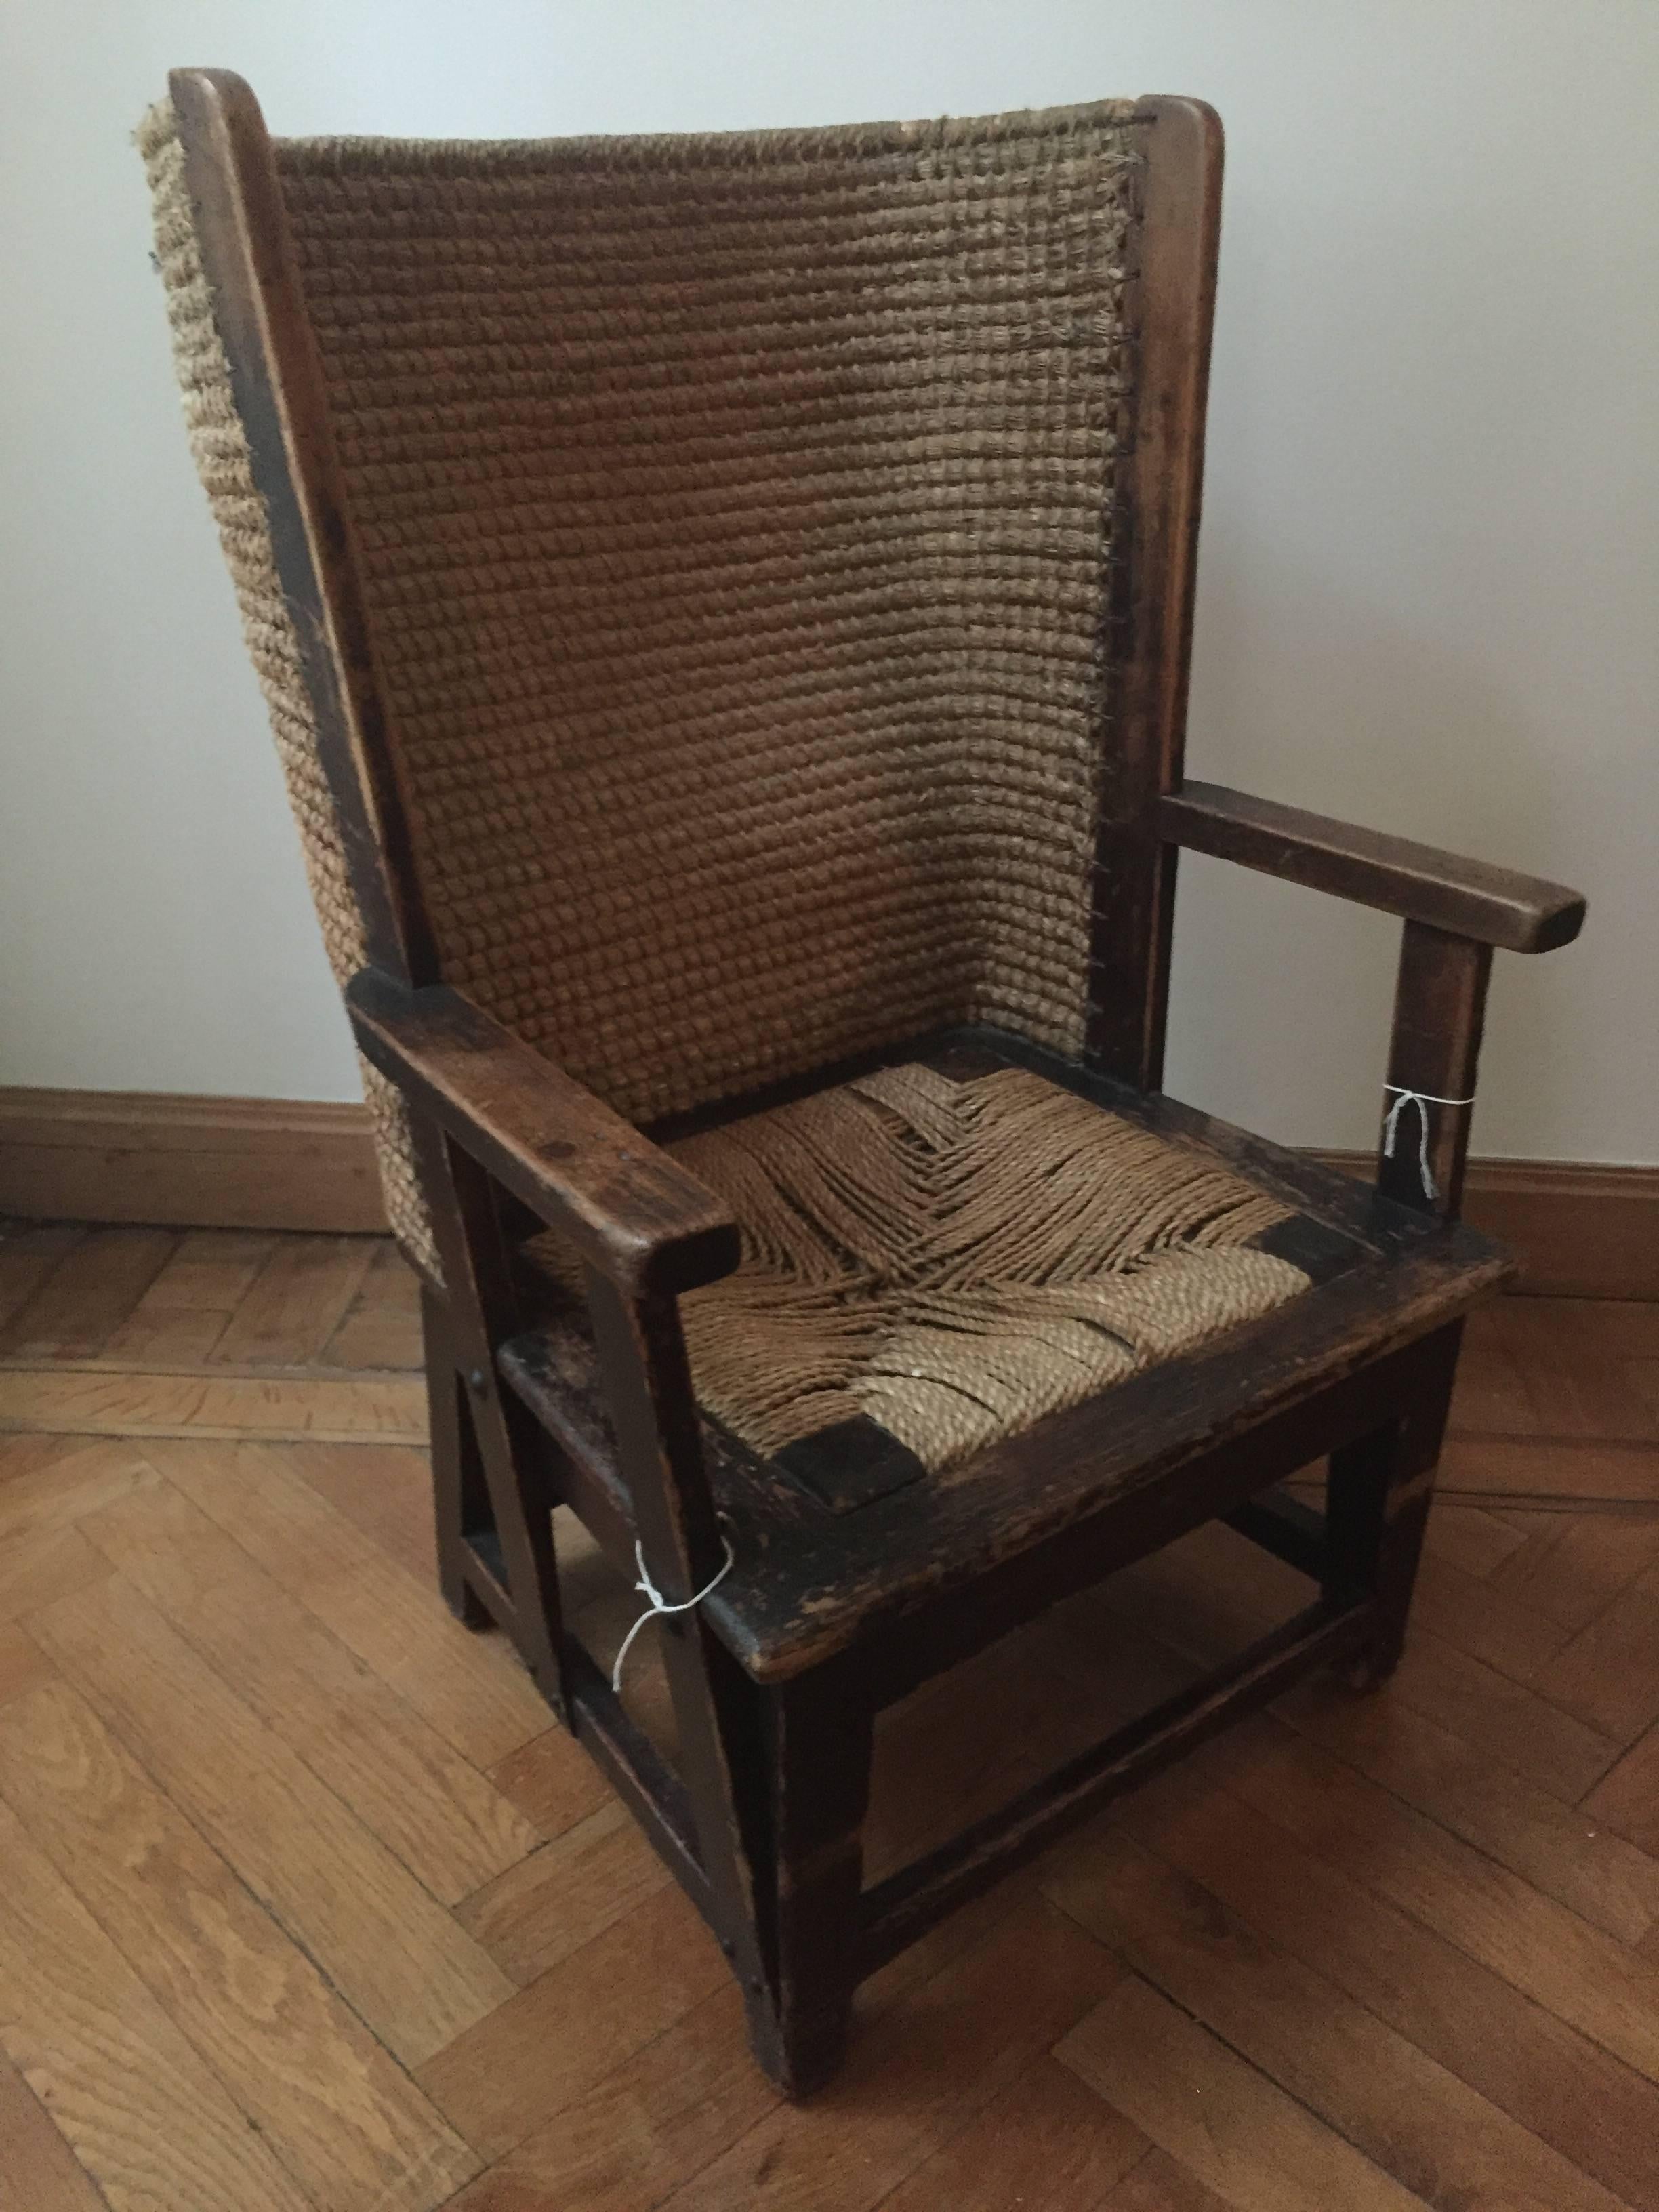 Childs Orkney chair manufactured at D.M Kirkness, 14 Palace Road, Kirkwall.